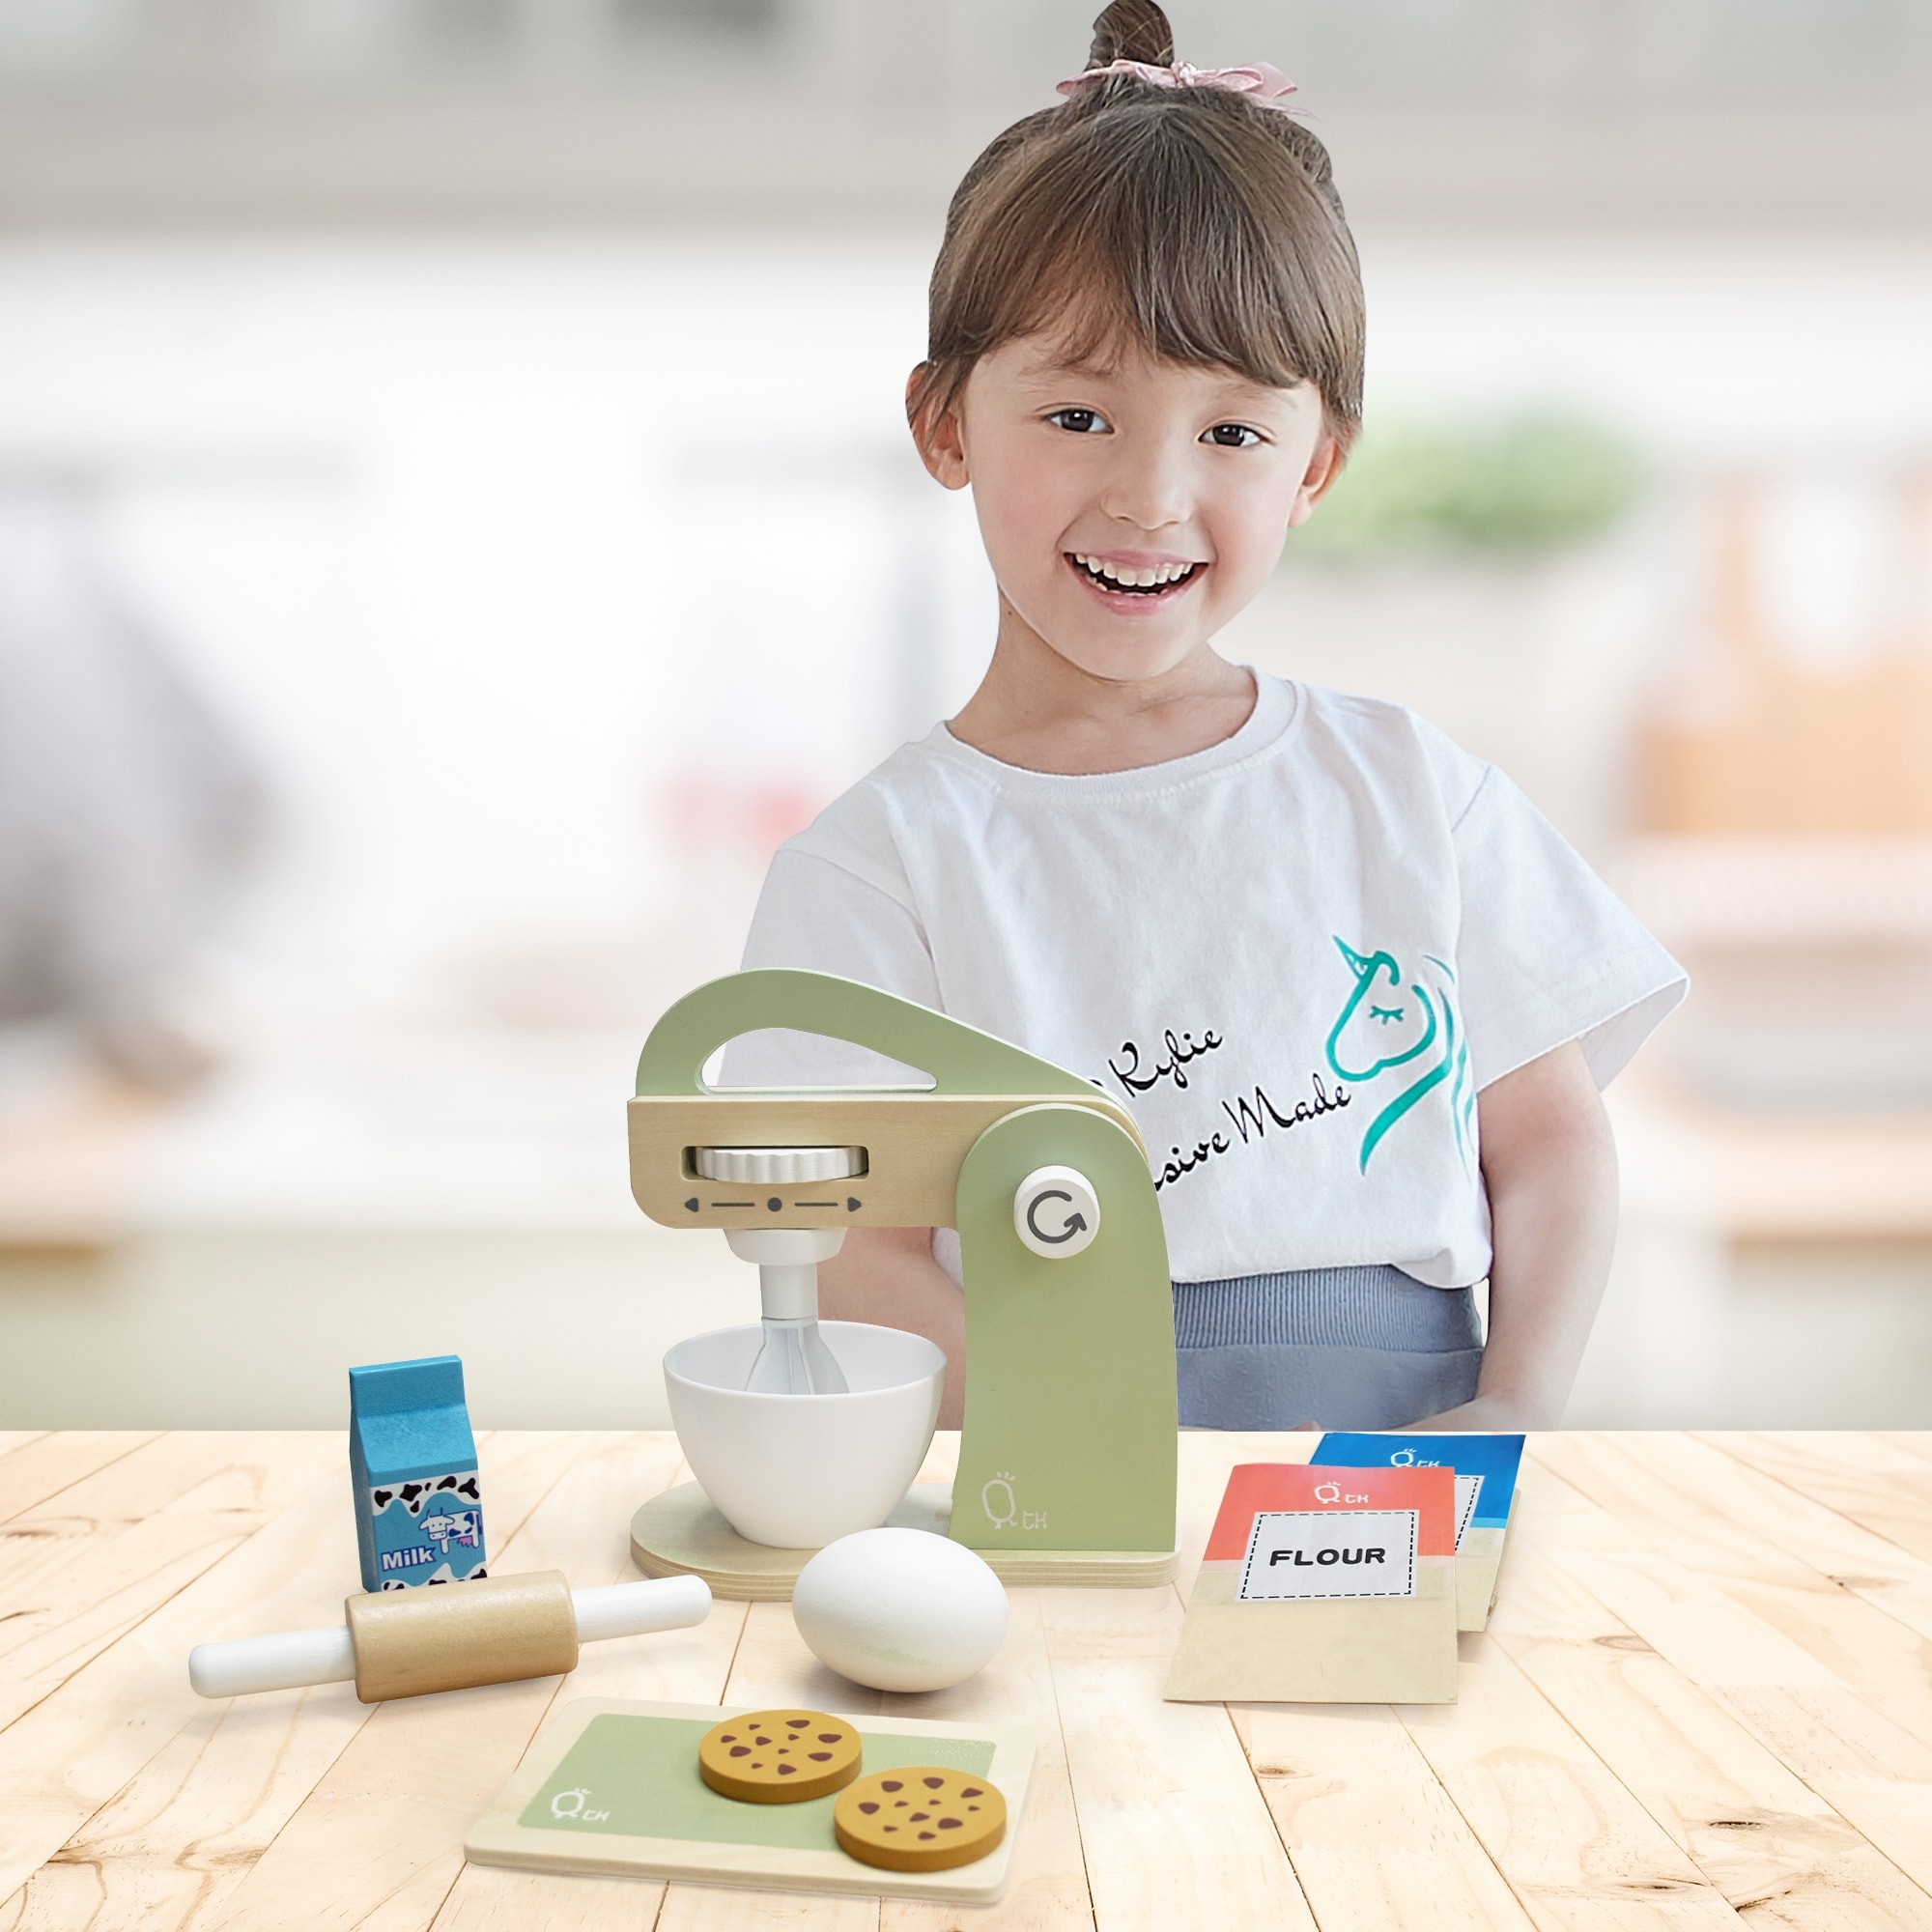 https://ak1.ostkcdn.com/images/products/is/images/direct/47a8f34f2f6a78f0a776d09e25ba44a411c7f821/Teamson-Kids---Little-Chef-Frankfurt-Wooden-Mixer-play-kitchen-accessories---Green.jpg